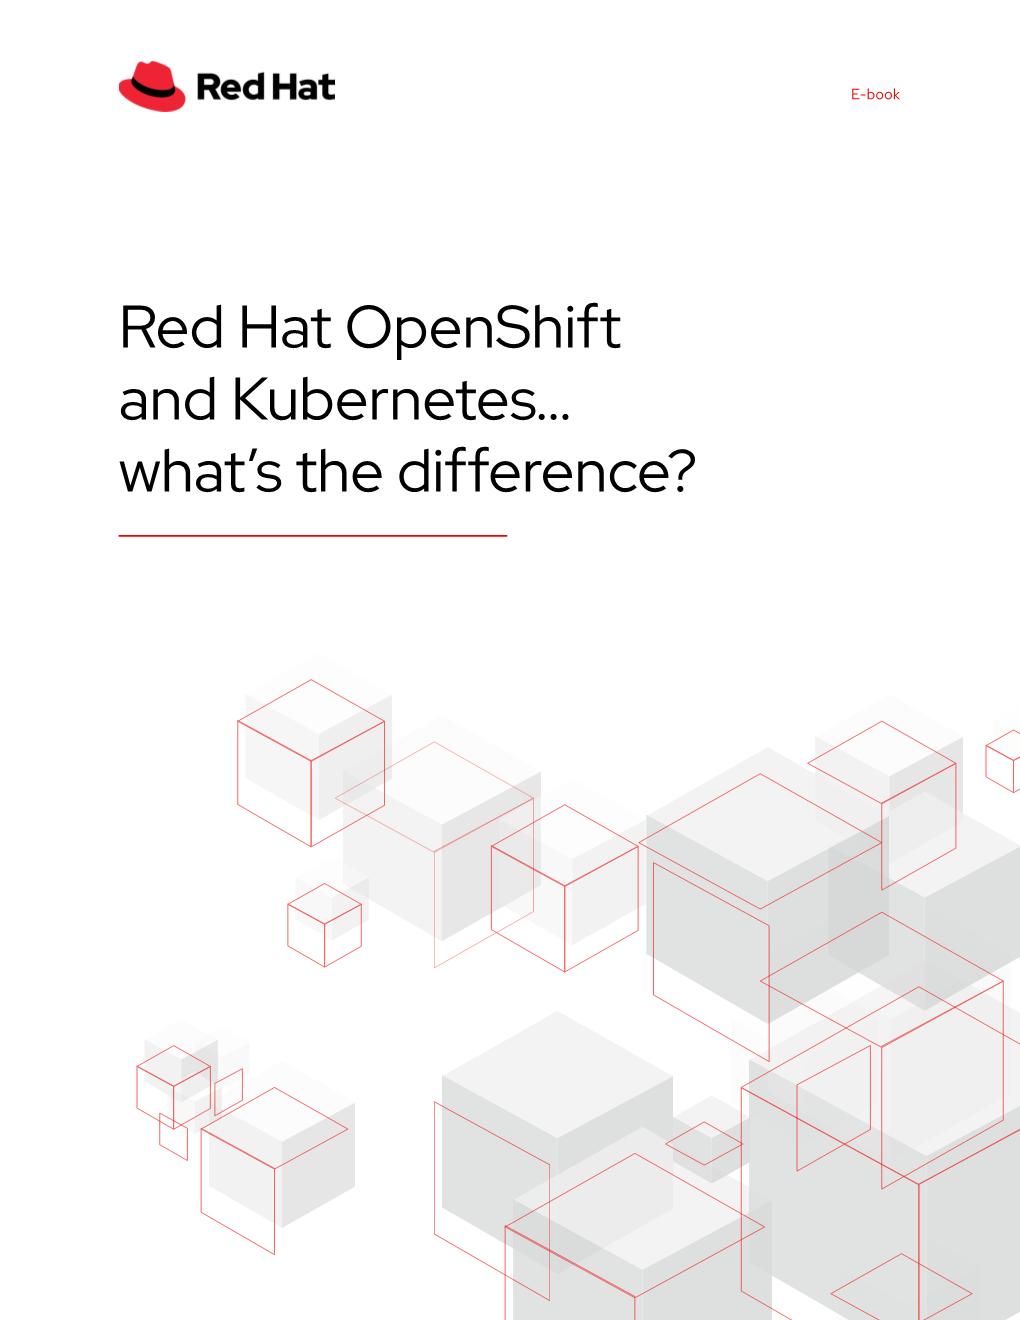 Red Hat Openshift and Kubernetes... What's the Difference?